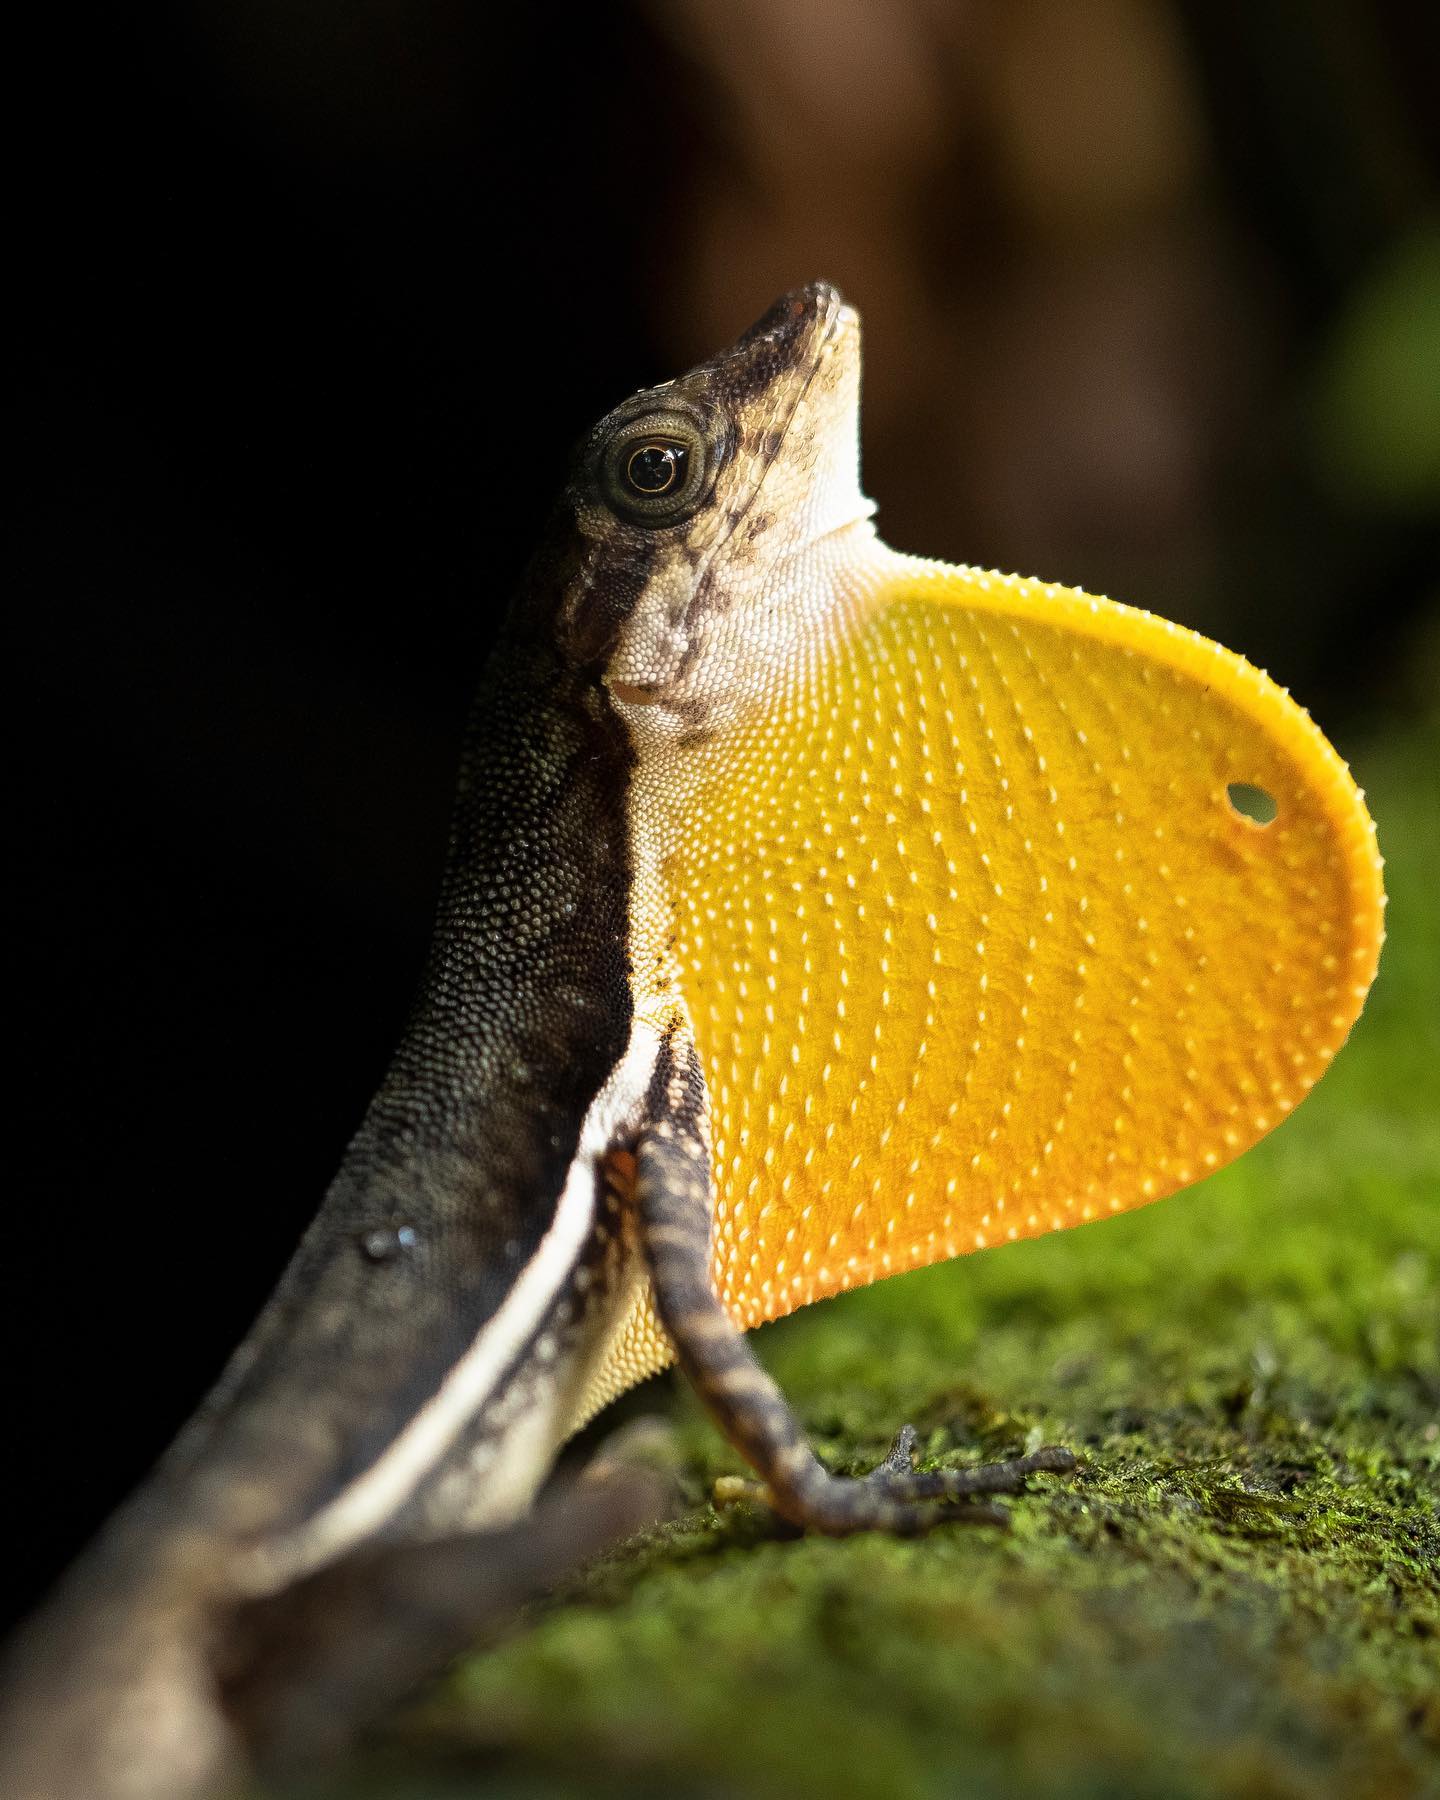 One of our magical neighbors!
.
This is a male Anole lizard (Norops oxylophus), found usually in low stones or vegetation near streams and water bodies. This adult male displays its bright colors to impress a nearby female.
.
Visit us to learn more about our magical rainforest and its creatures! Visit sensoria.cr or reach out via WhatsApp +506 8955-4971.
.
#experiencesensoria
.
#travel #costarica #nature #leisure #explore #tourism #visitcostarica #photography #wildlife #rainforest #independence #reptilesofinstagram #sensoriawildlife